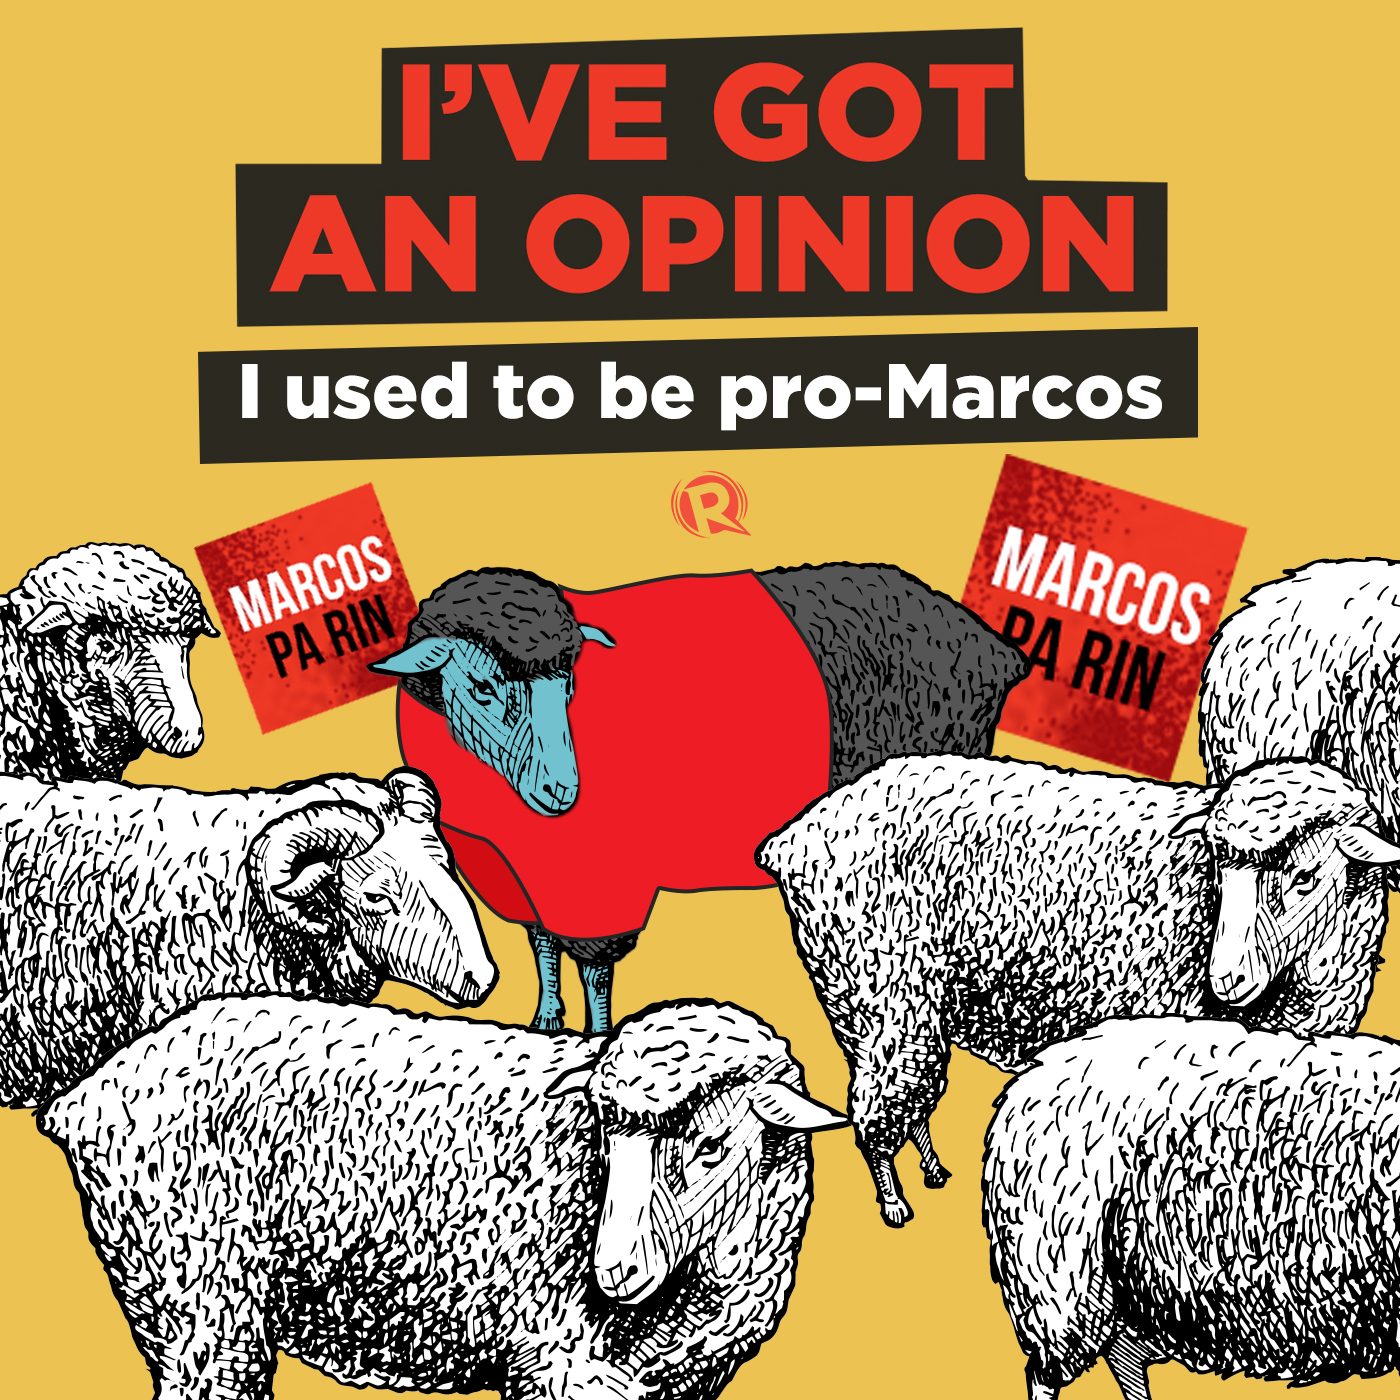 [PODCAST] I’ve Got An Opinion: I used to be pro-Marcos